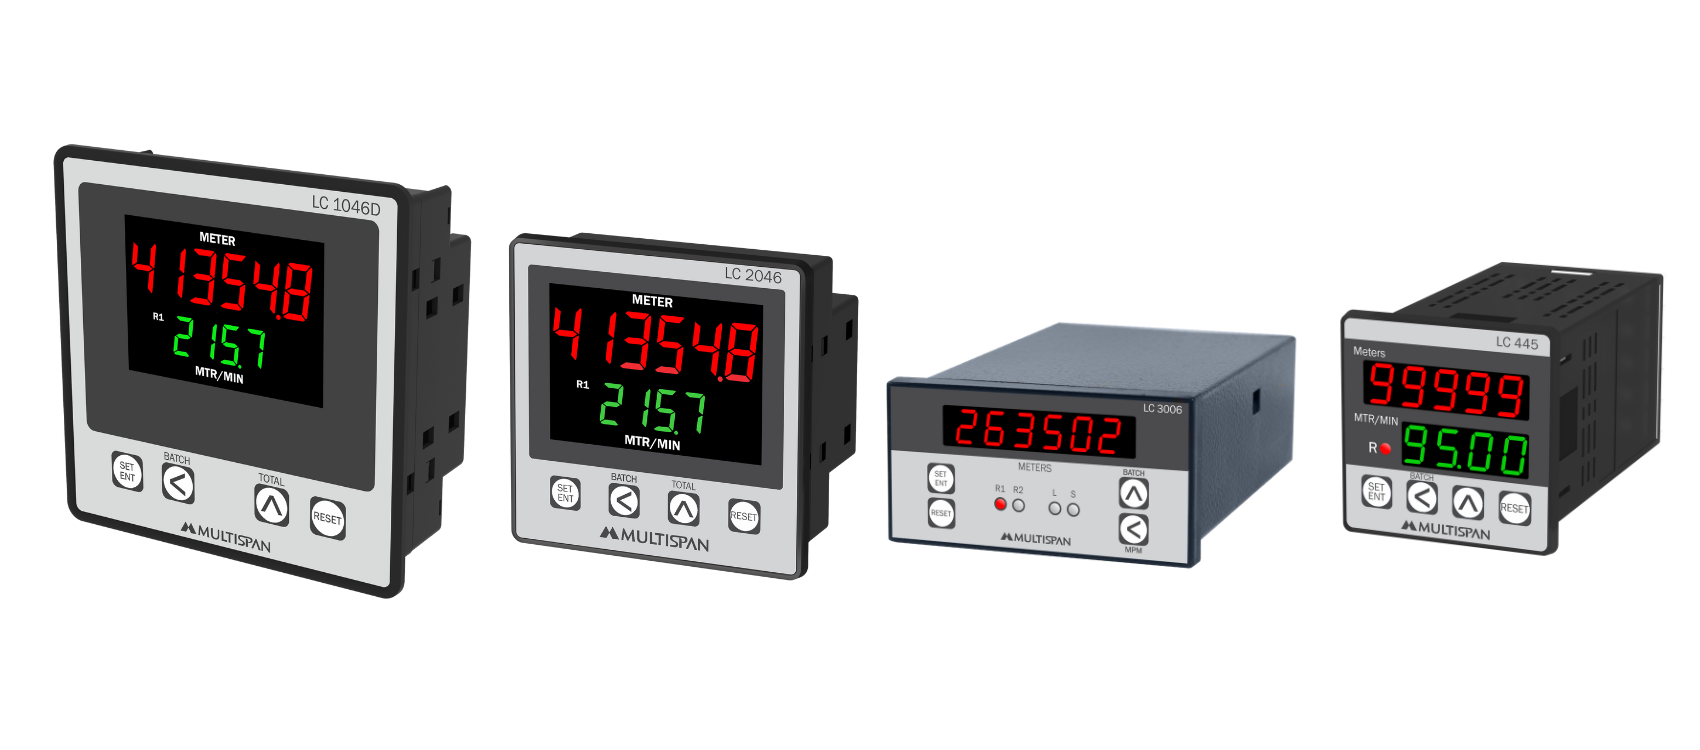 LC-1046D - Length Counter - product image